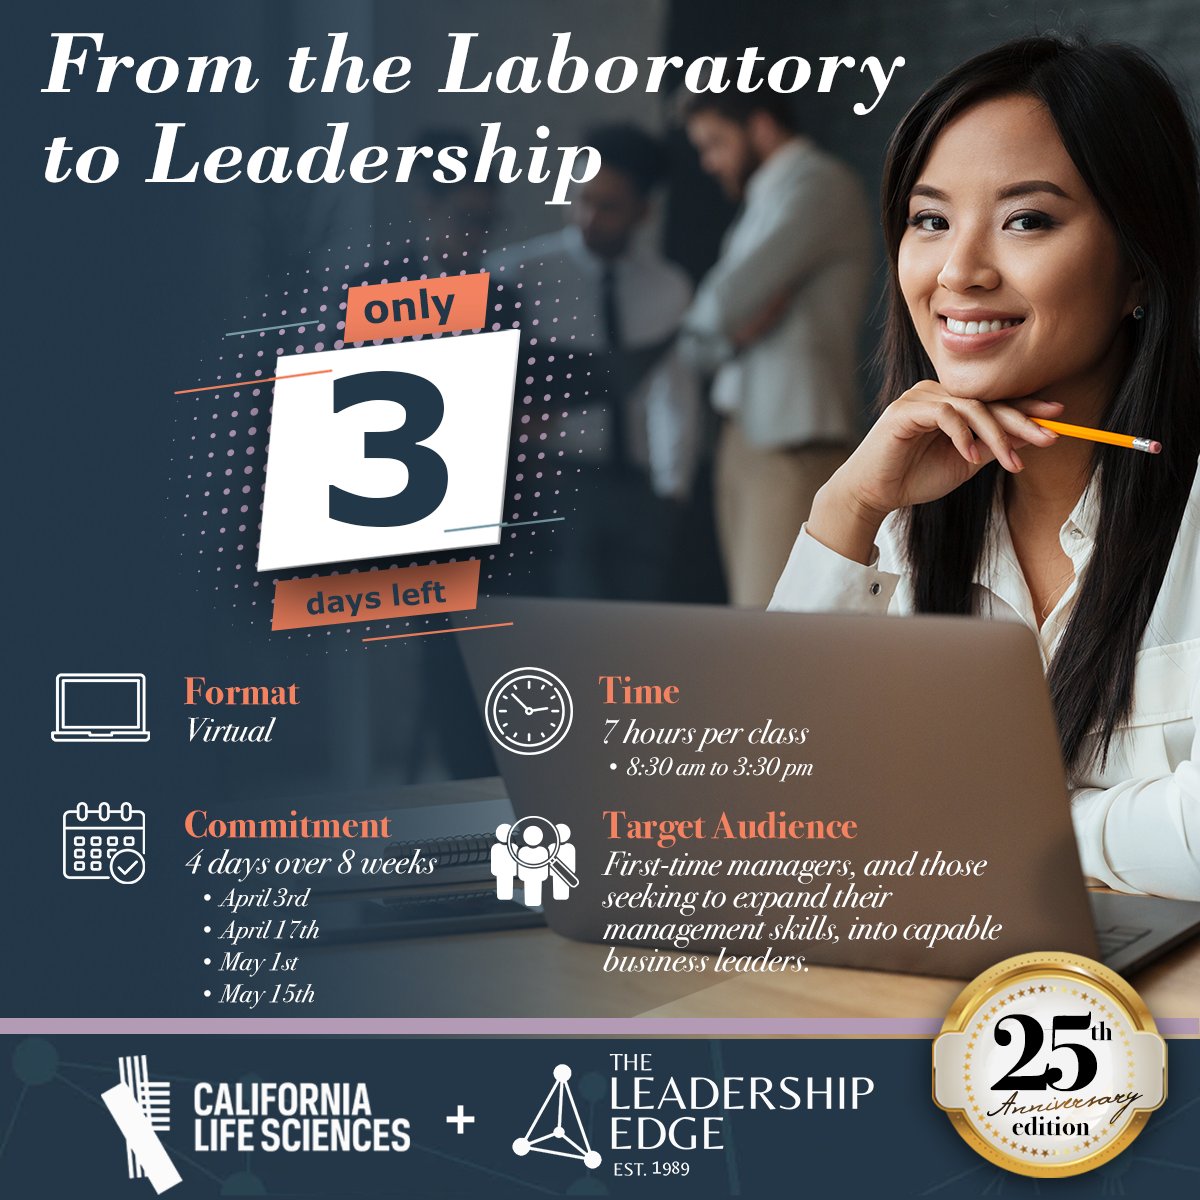 3 DAYS LEFT to sign up for our Virtual program w/ @LabtoLeader kicking off April 3rd from the convenience of your workplace. Prepare your team for success with the 'From the Laboratory to Leadership' Program! #Virtual #Newmanagers Register bit.ly/3VB8zEQ